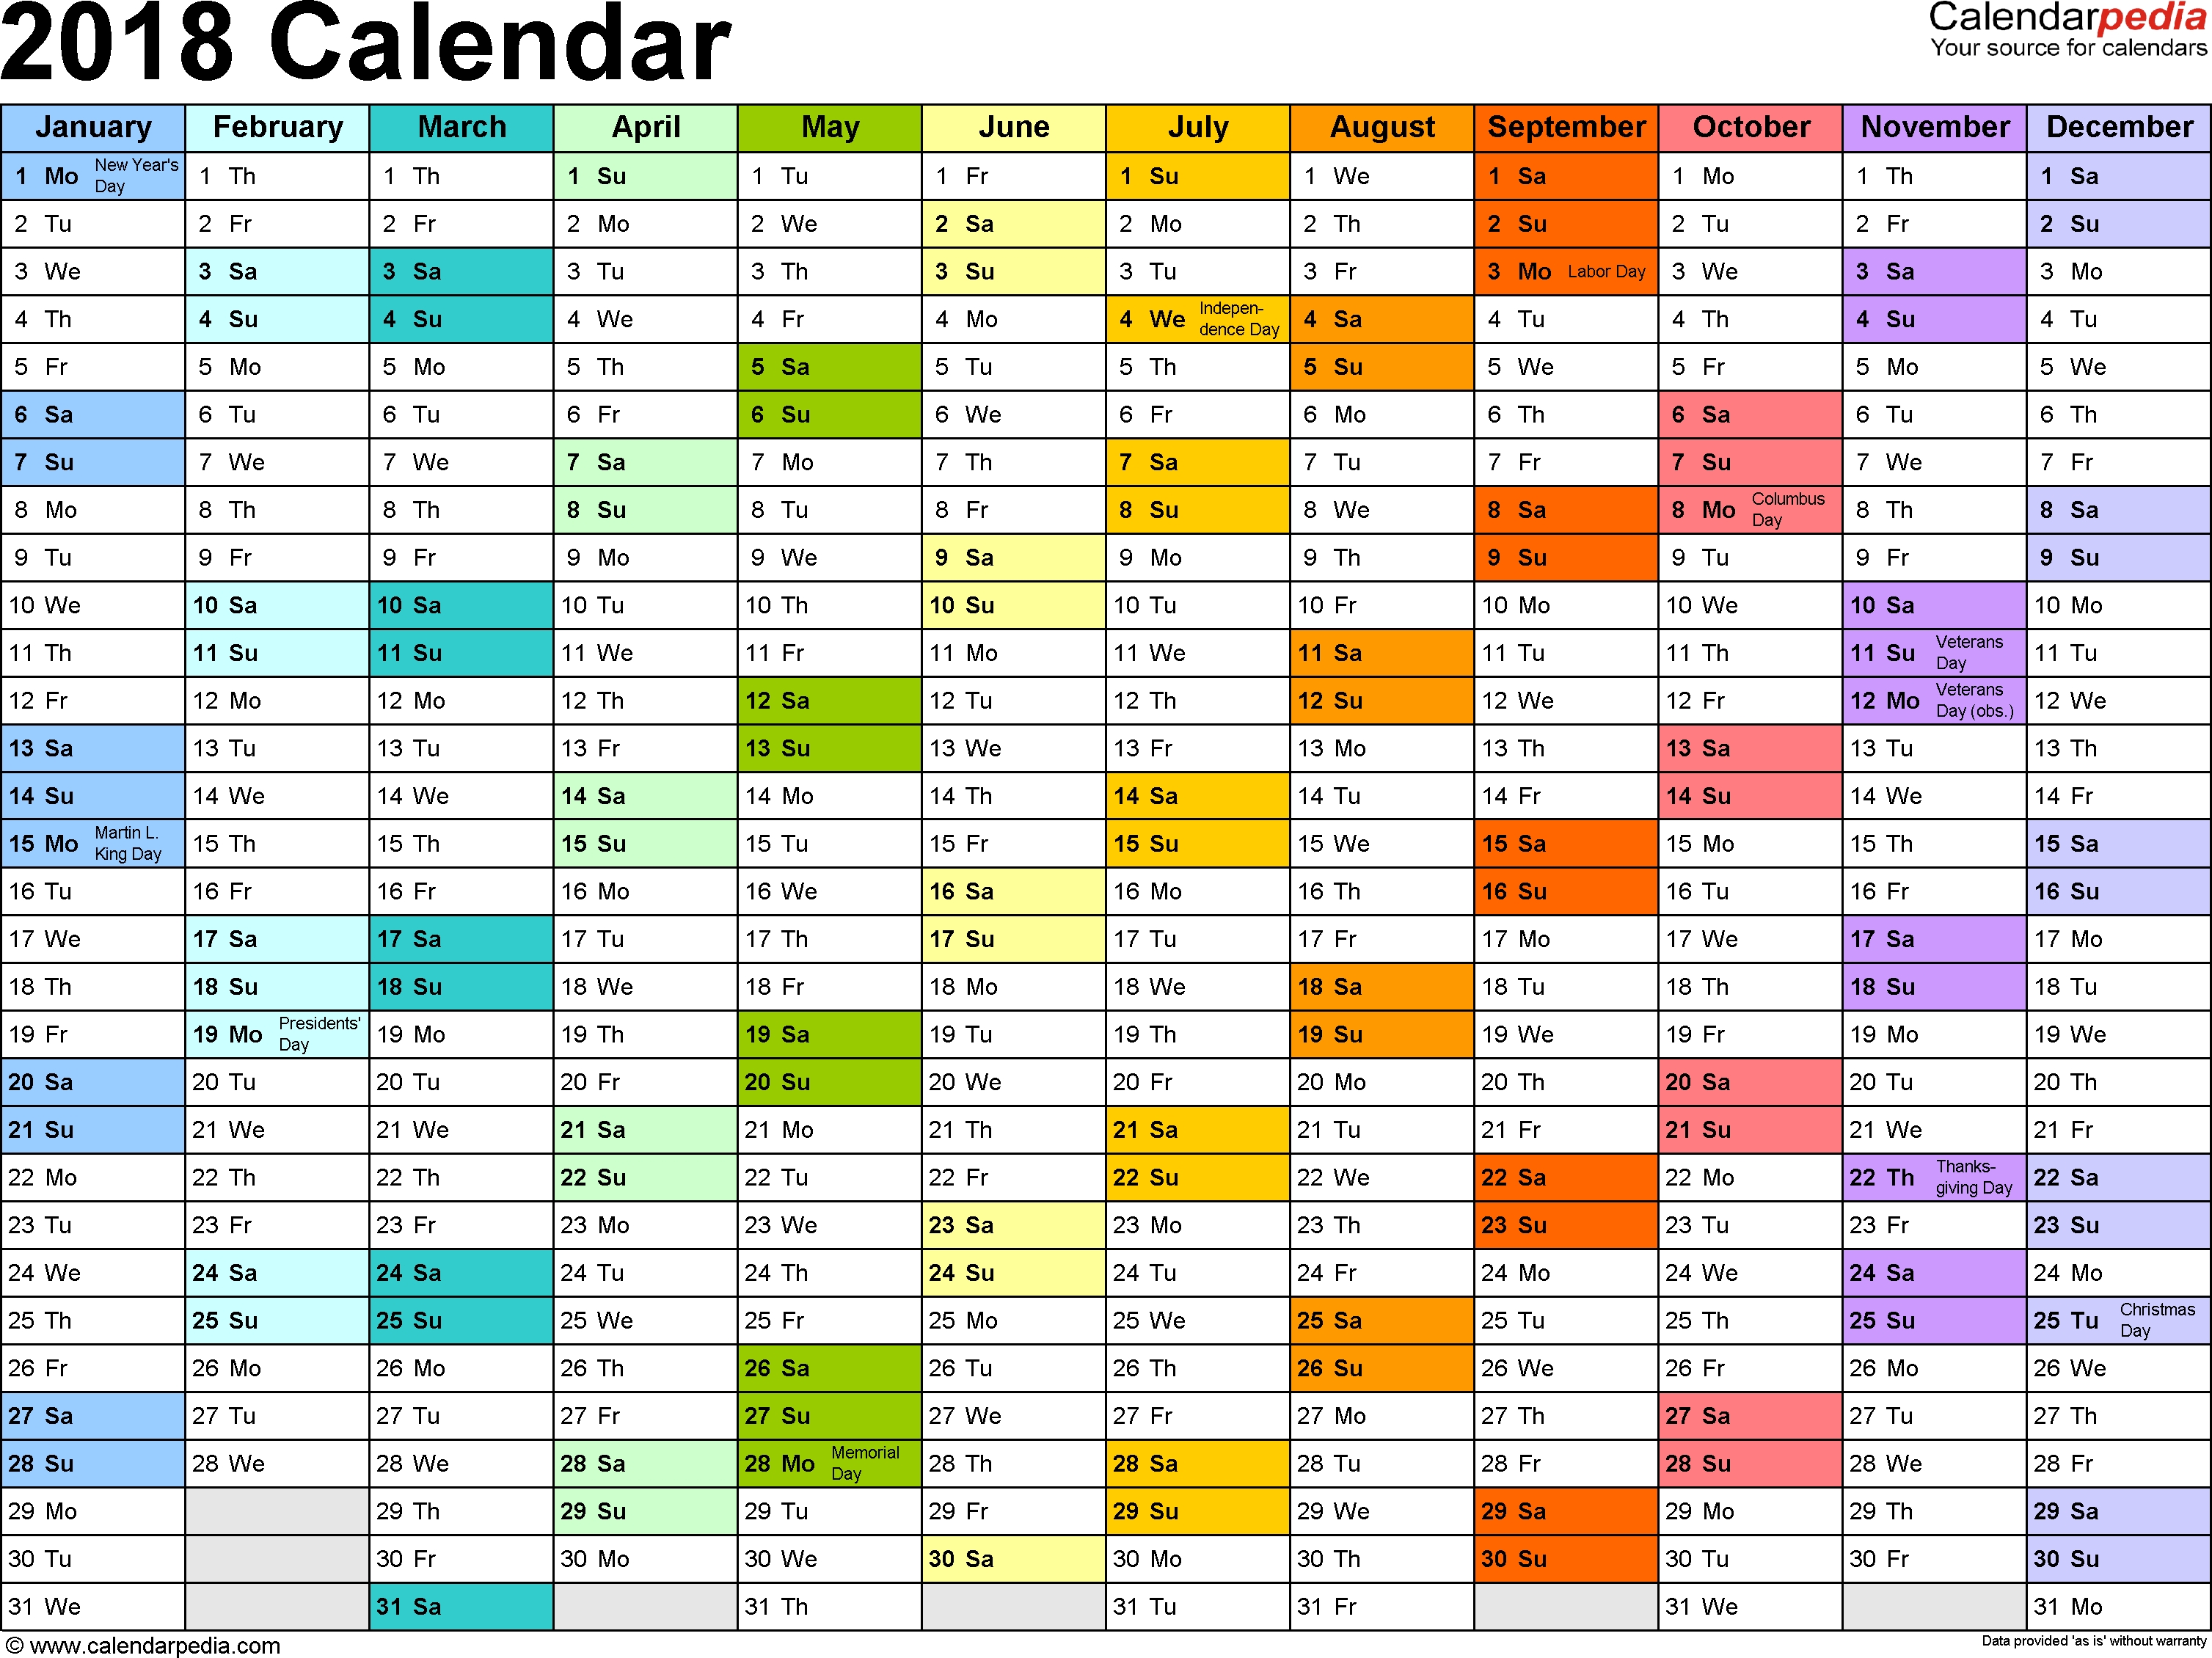 Calendarpedia - Your Source For Calendars within August 29 Hourly Schedule Template